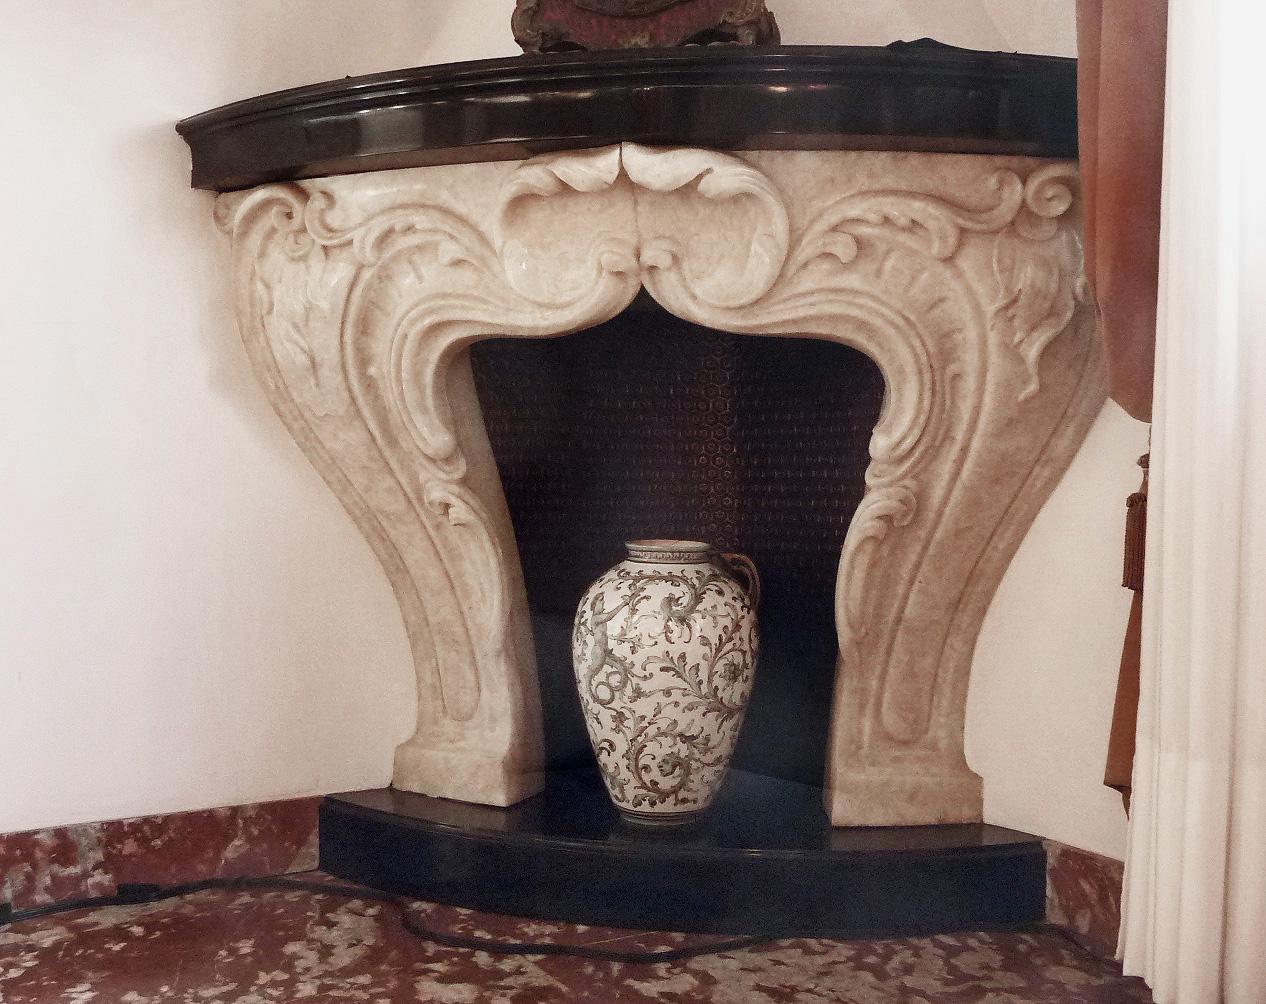 Splendid and rare corner fireplace in Baroque style, France 1940s. Of upper middle-class taste typical of the period characterised by elegant and refined eclecticism. This fireplace imposes itself sinuously in space, expanding from a generously